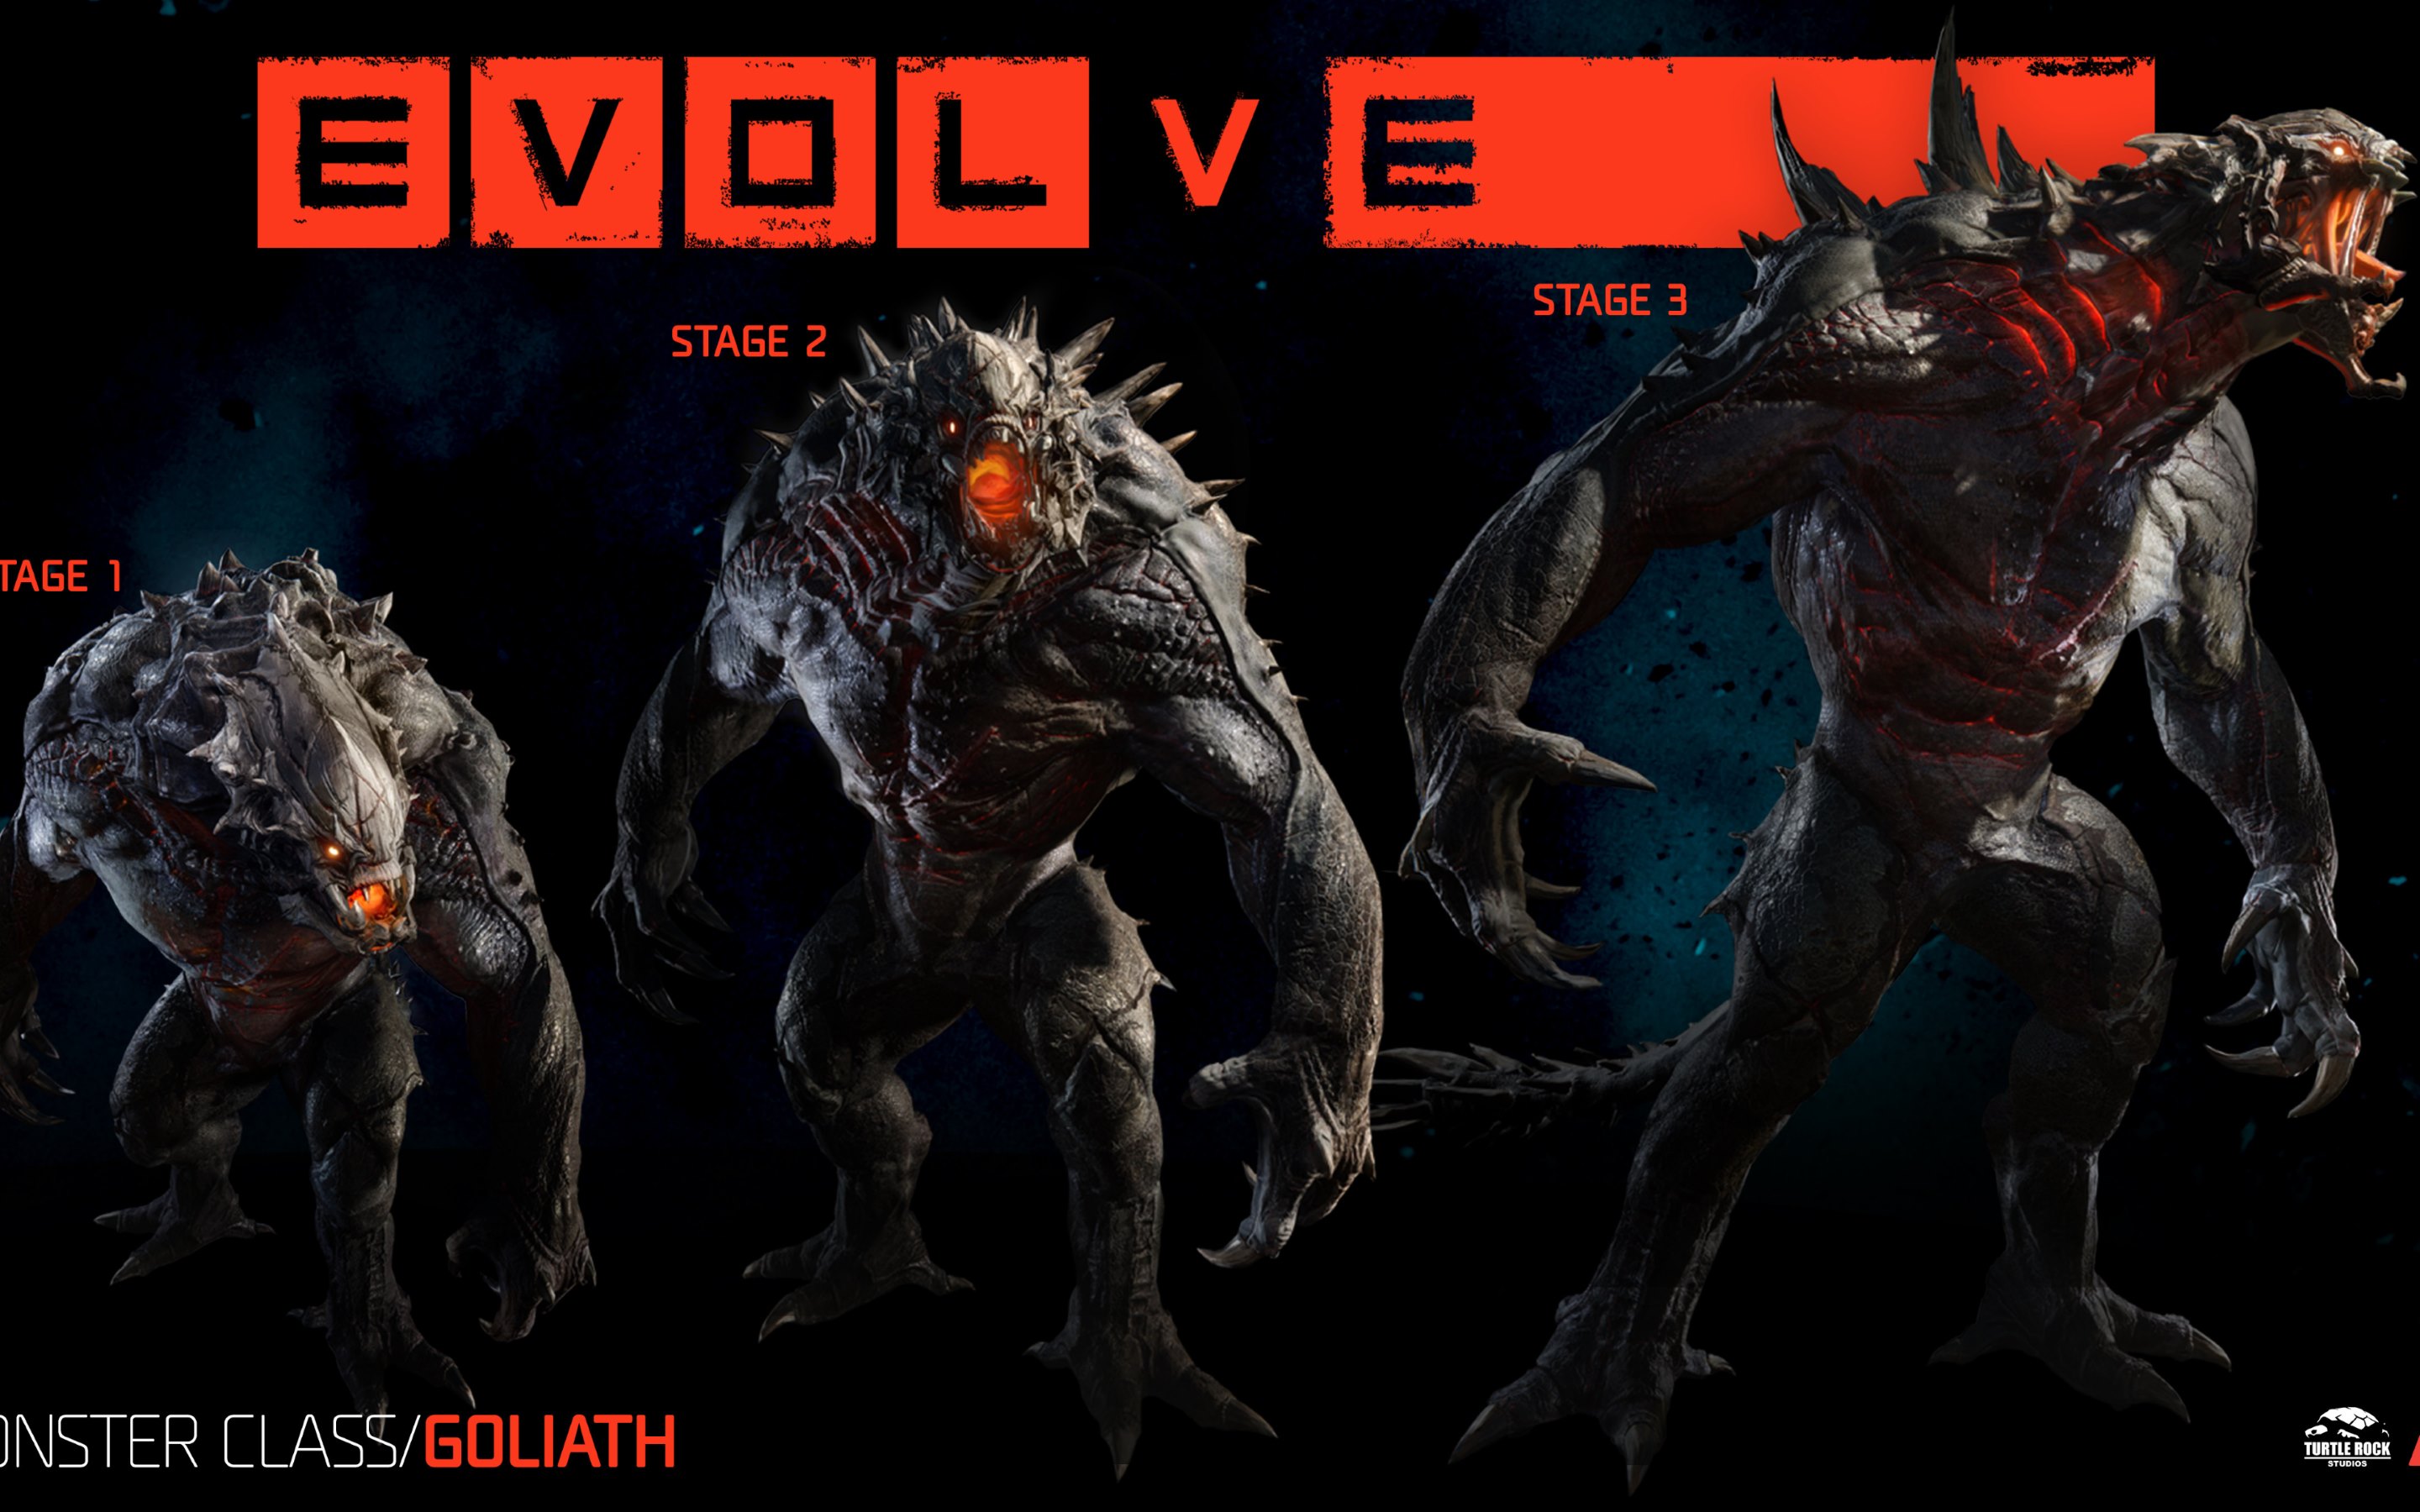 Evolve Wallpapers